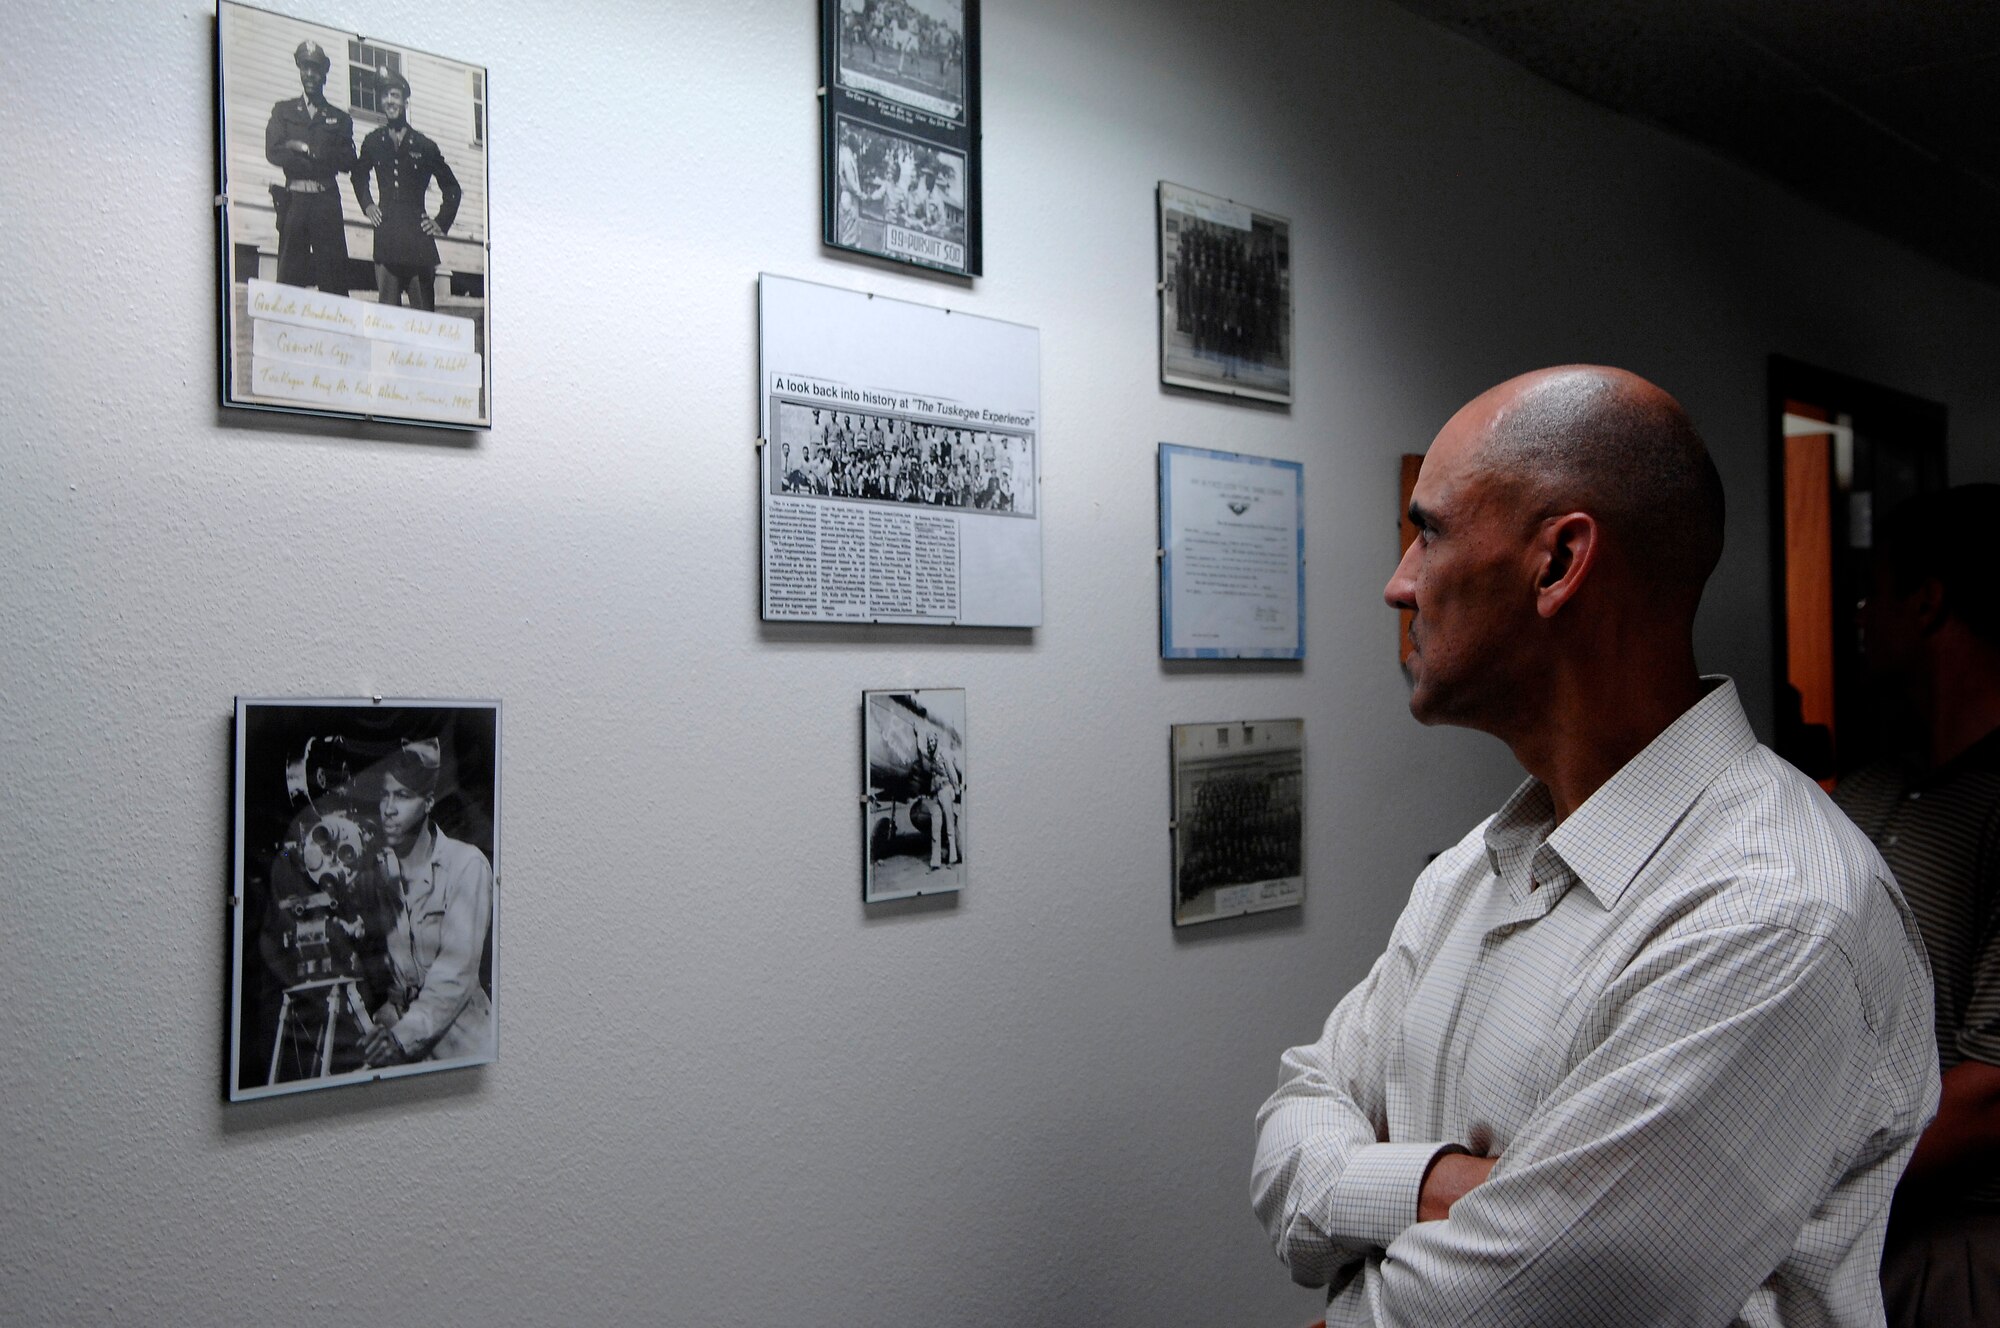 Indianapolis Colts head coach Tony Dungy looks at Tuskegee Airmen memorabilia at the 560th Flying Training Squadron at Randolph Air Force Base, Texas, June 1. Colts team members spent the day visiting with base personnel and school children, enhancing the already strong relationship between the team and the Air Force. Mr. Dungy's father, Wilbur Dungy, was a Tuskegee Airman.  (U.S. Air Force photo/Staff Sgt. Brian Ferguson)
